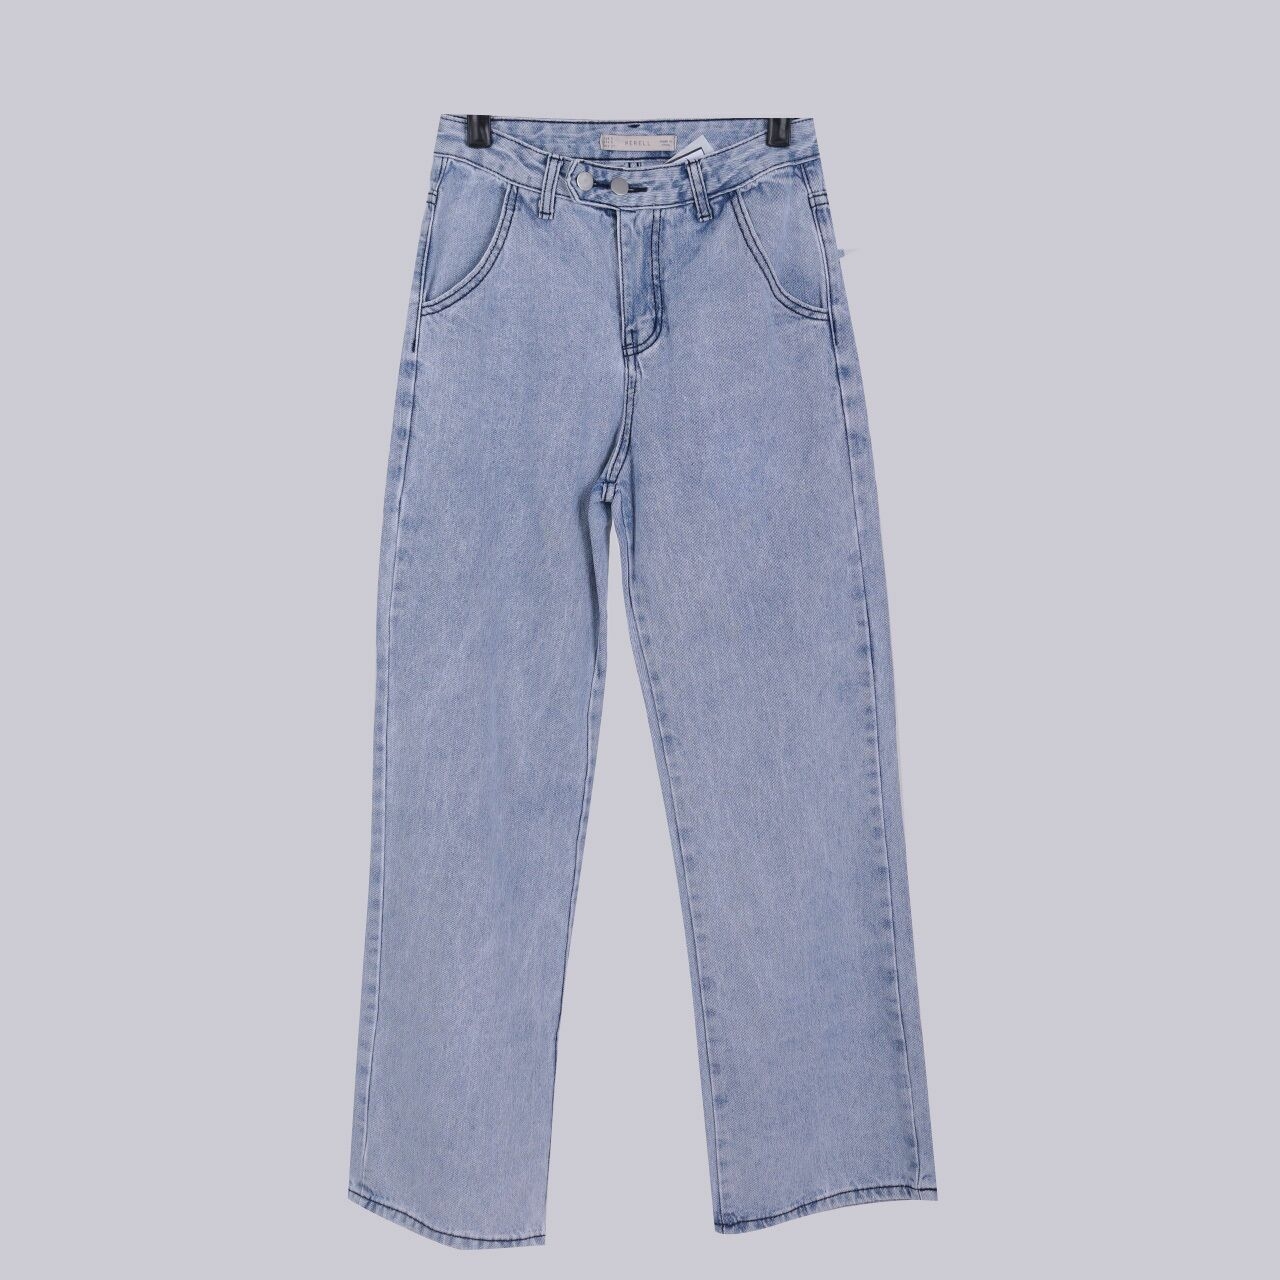 Herell Blue Jeans Long Pants